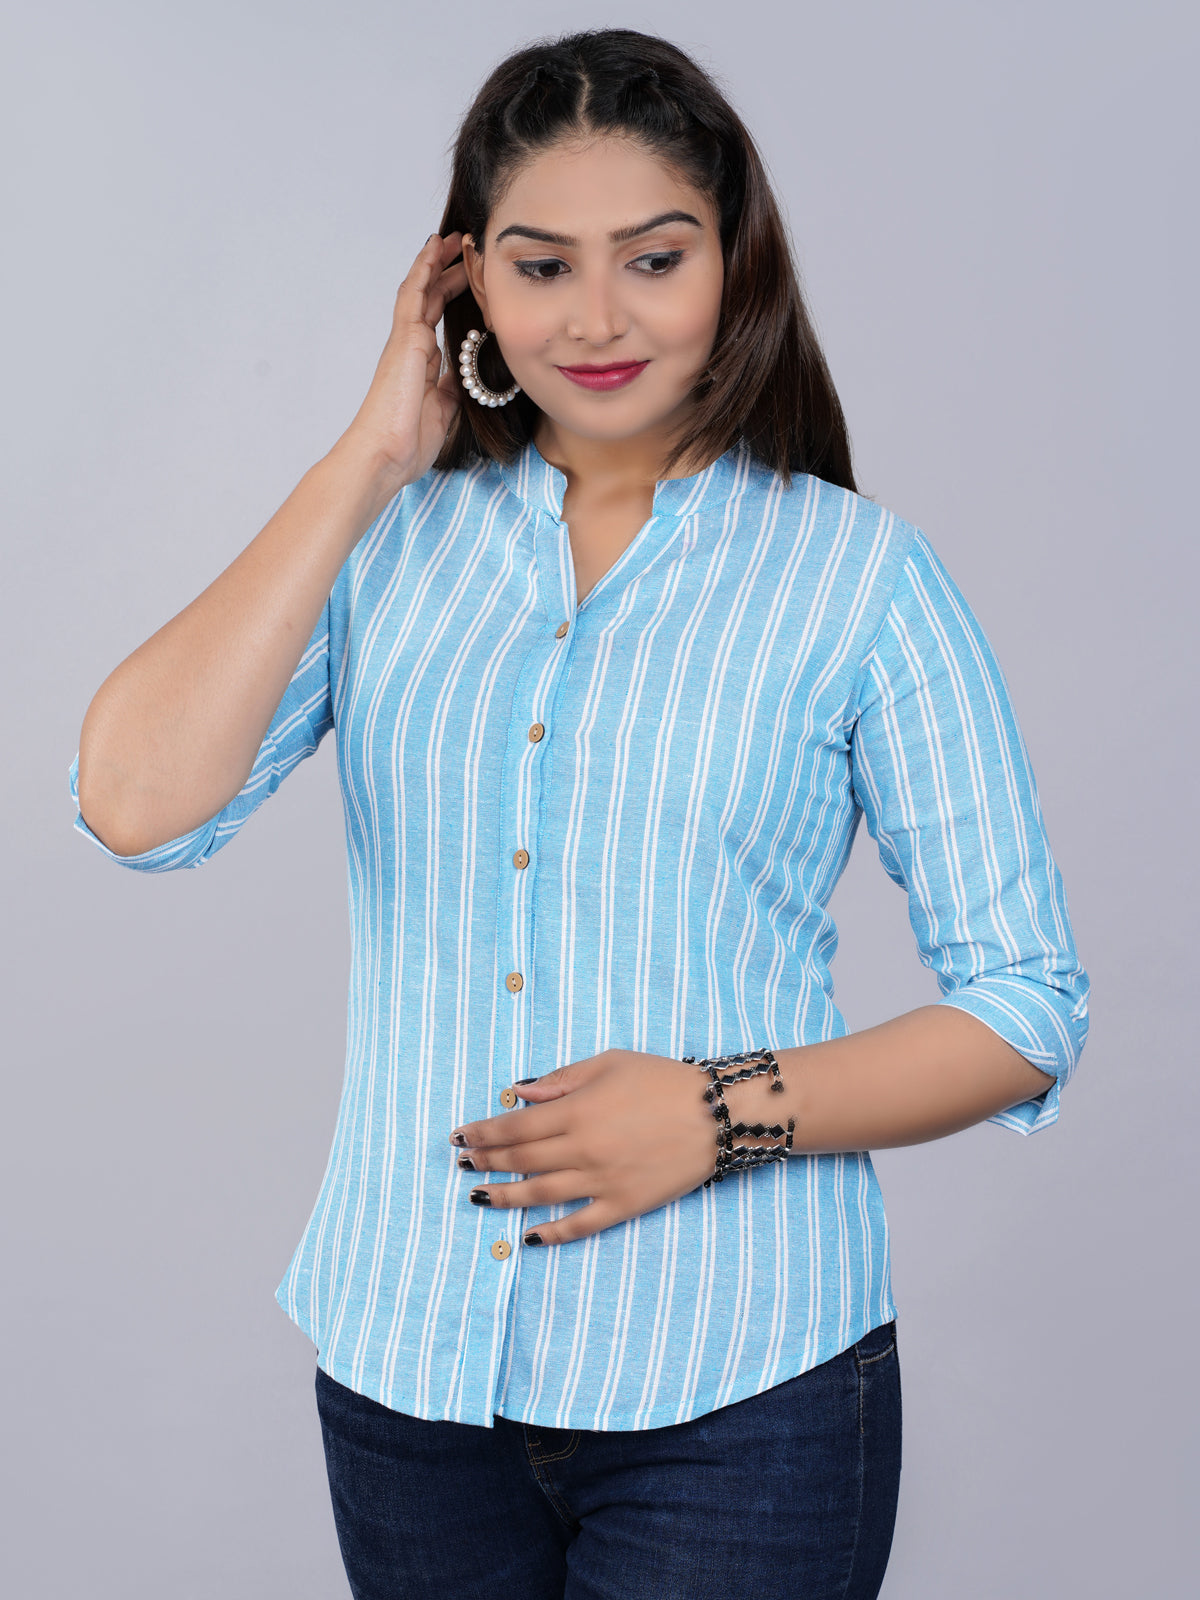 Womens Turquoise Mangoline Striped Casual Shirt